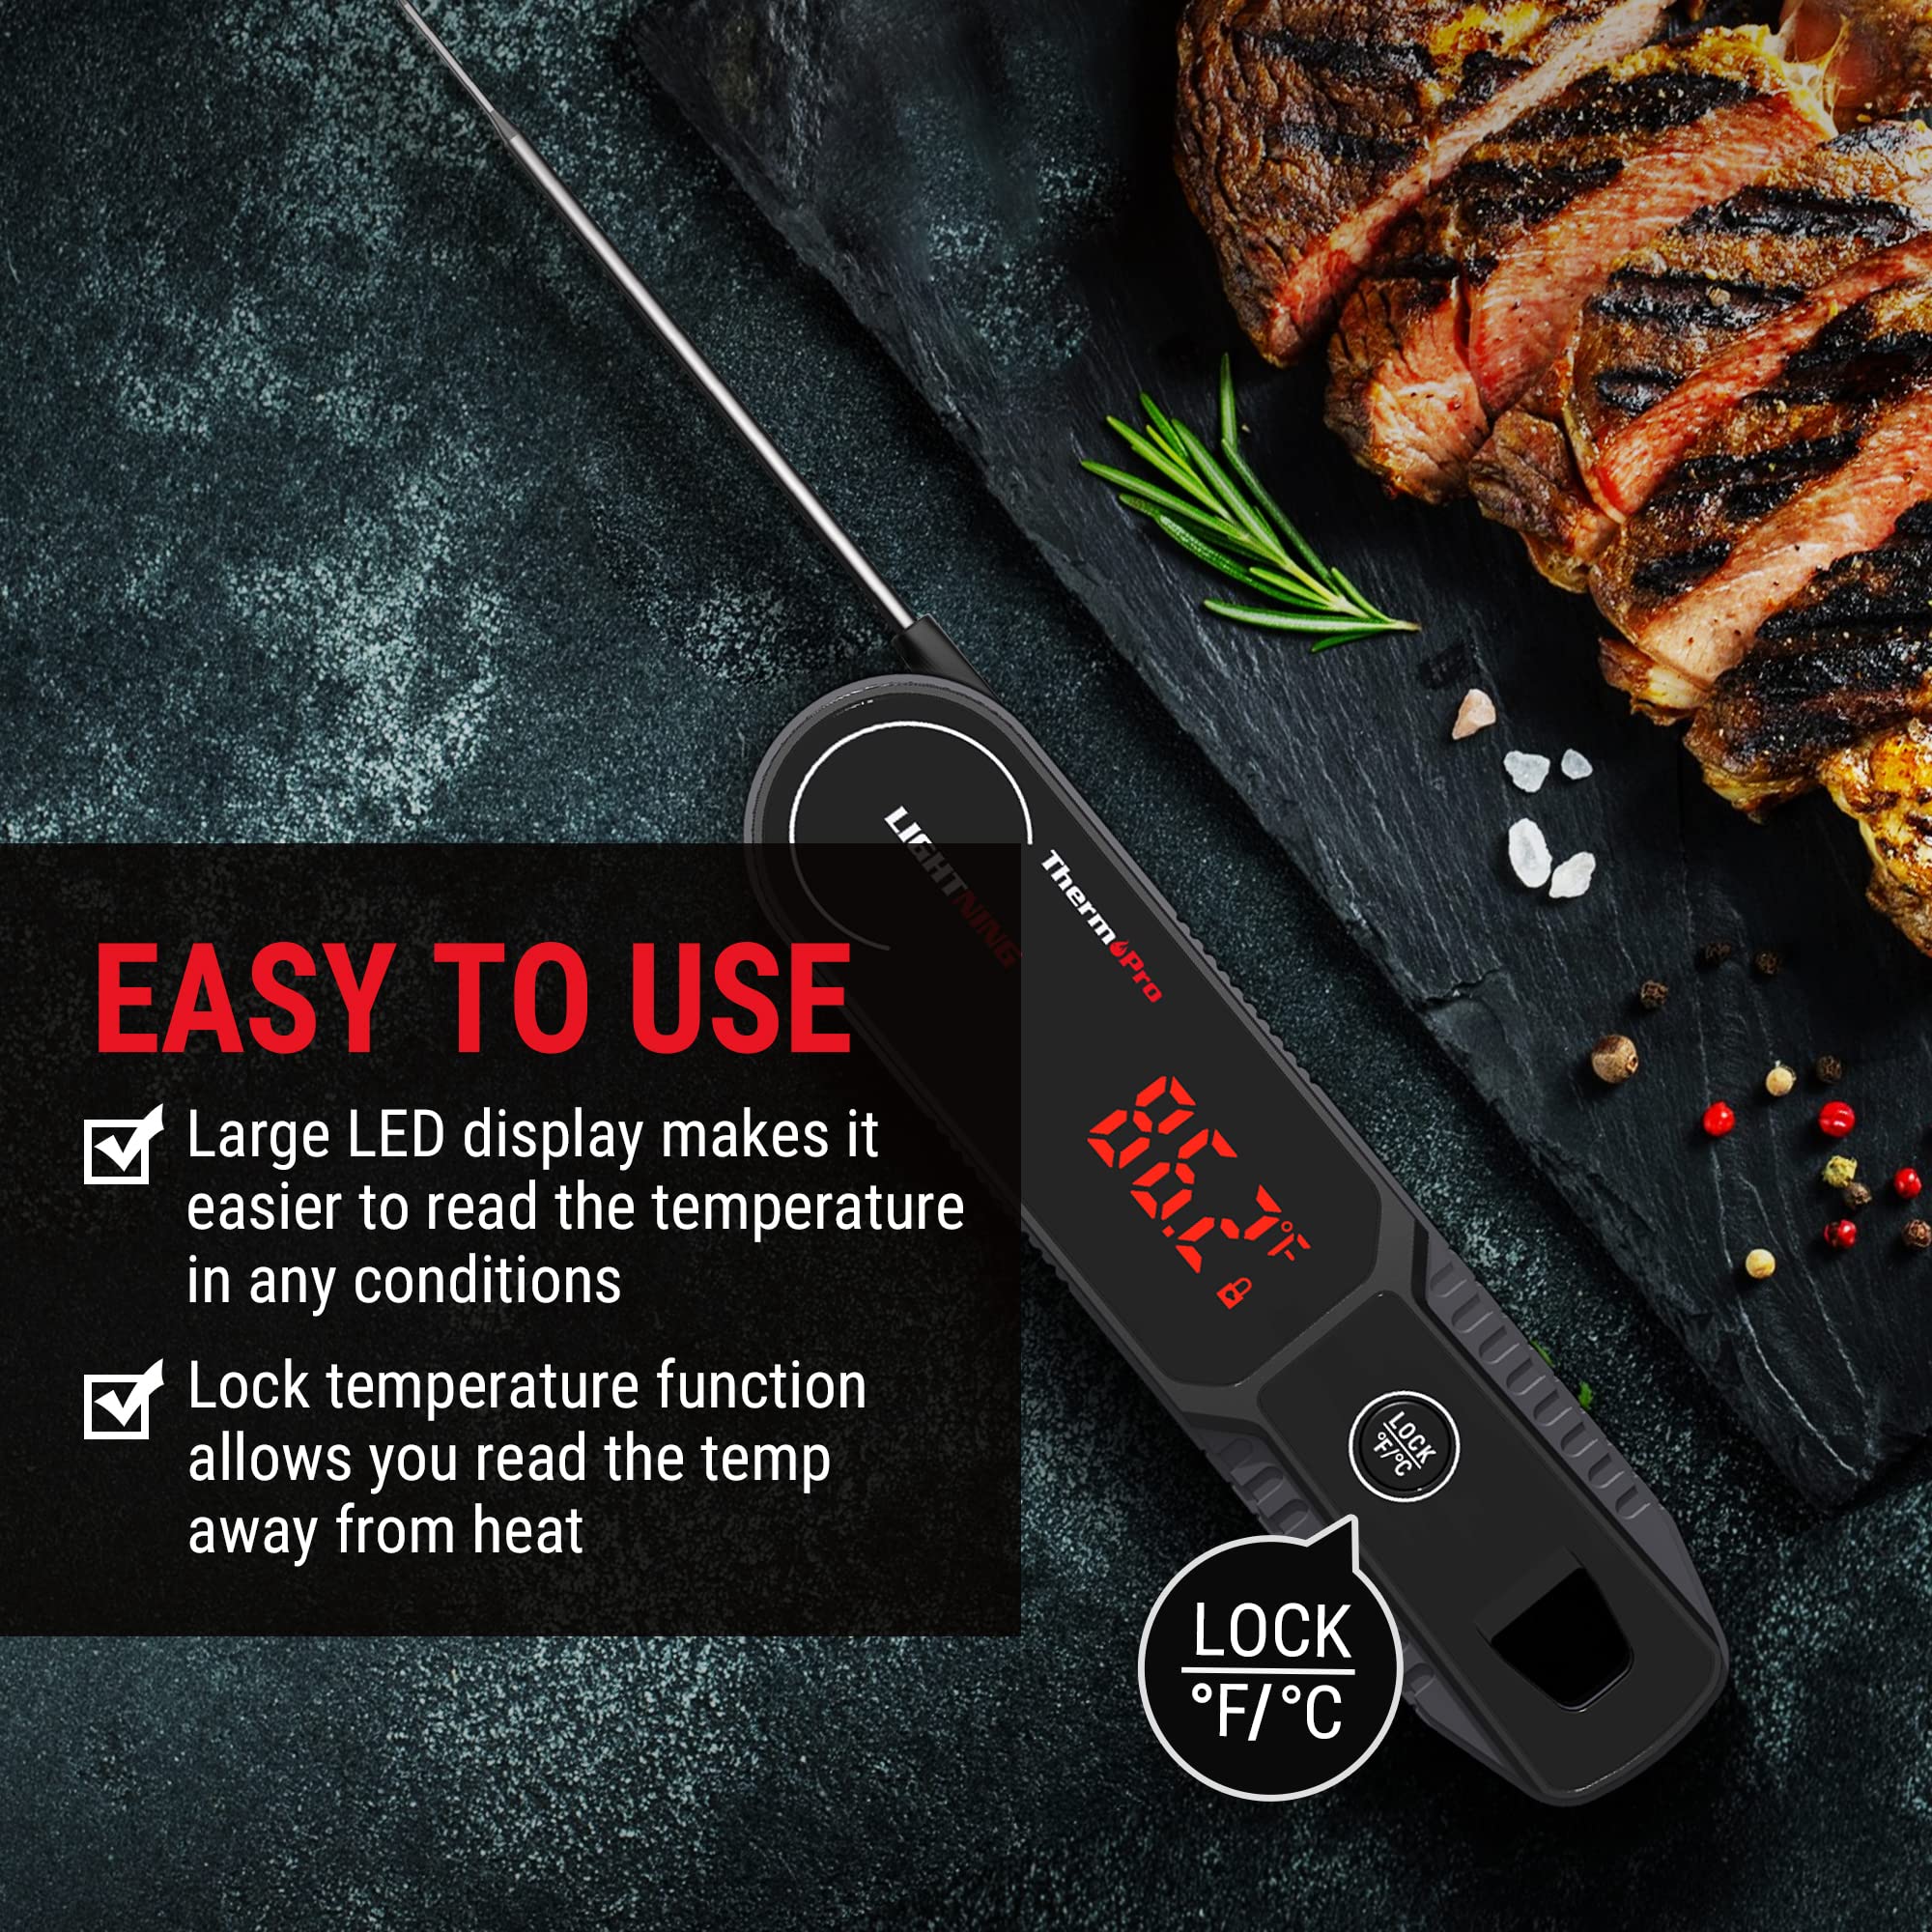 ThermoPro Lightning 1-Second Instant Read Meat Thermometer, Calibratable Kitchen Food Thermometer with Ambidextrous Display, Waterproof Cooking Thermometer for Oil Deep Fry Smoker BBQ Grill